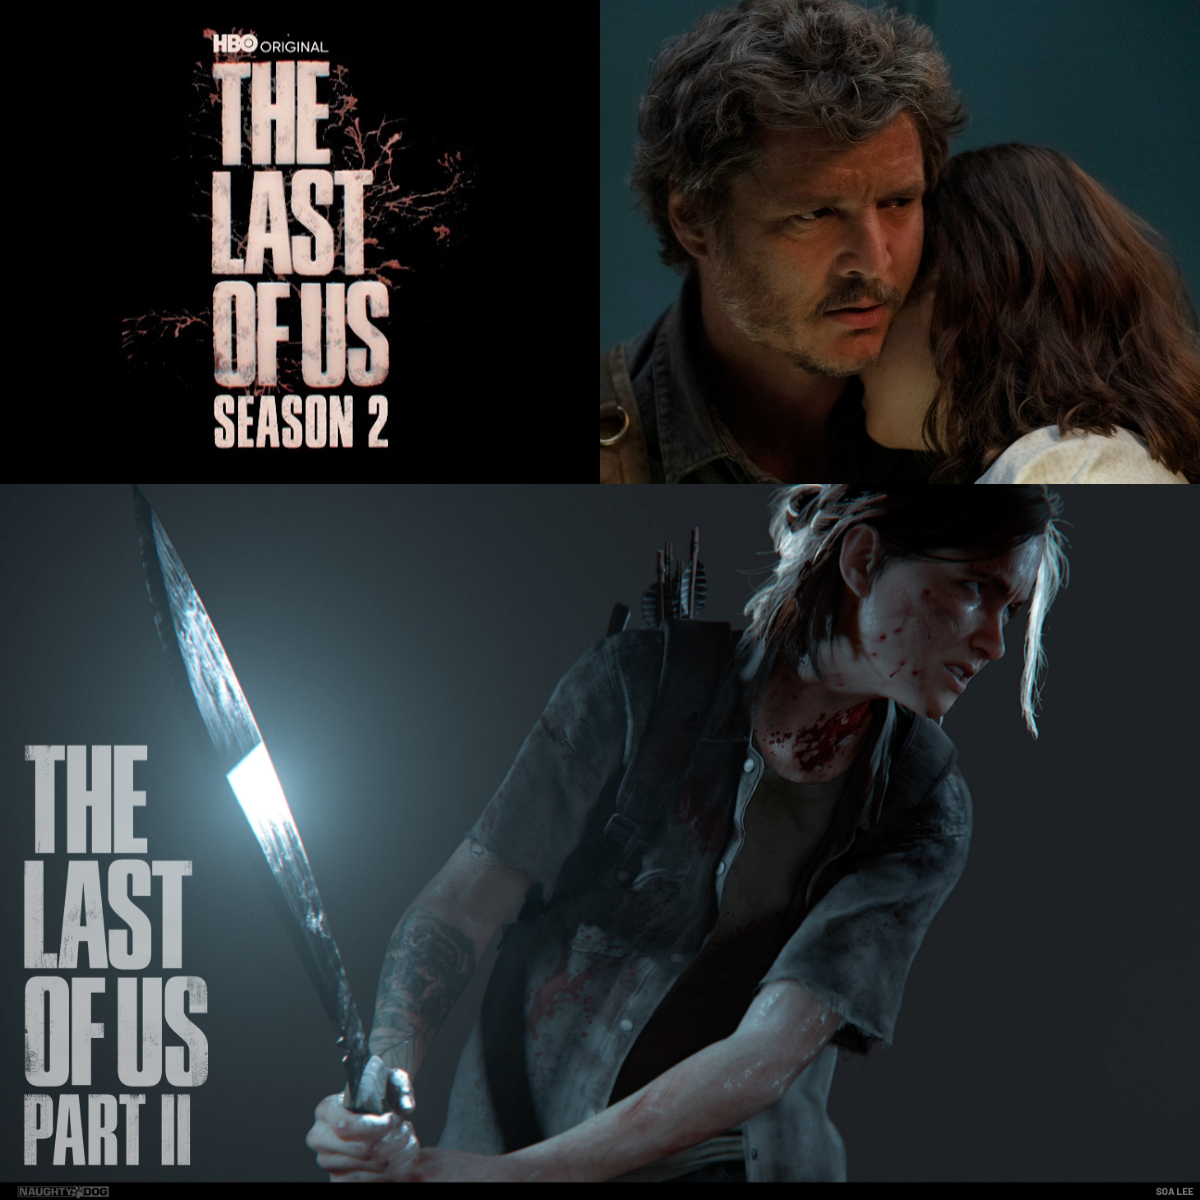 What We Want to Happen in The Last of Us Season 2